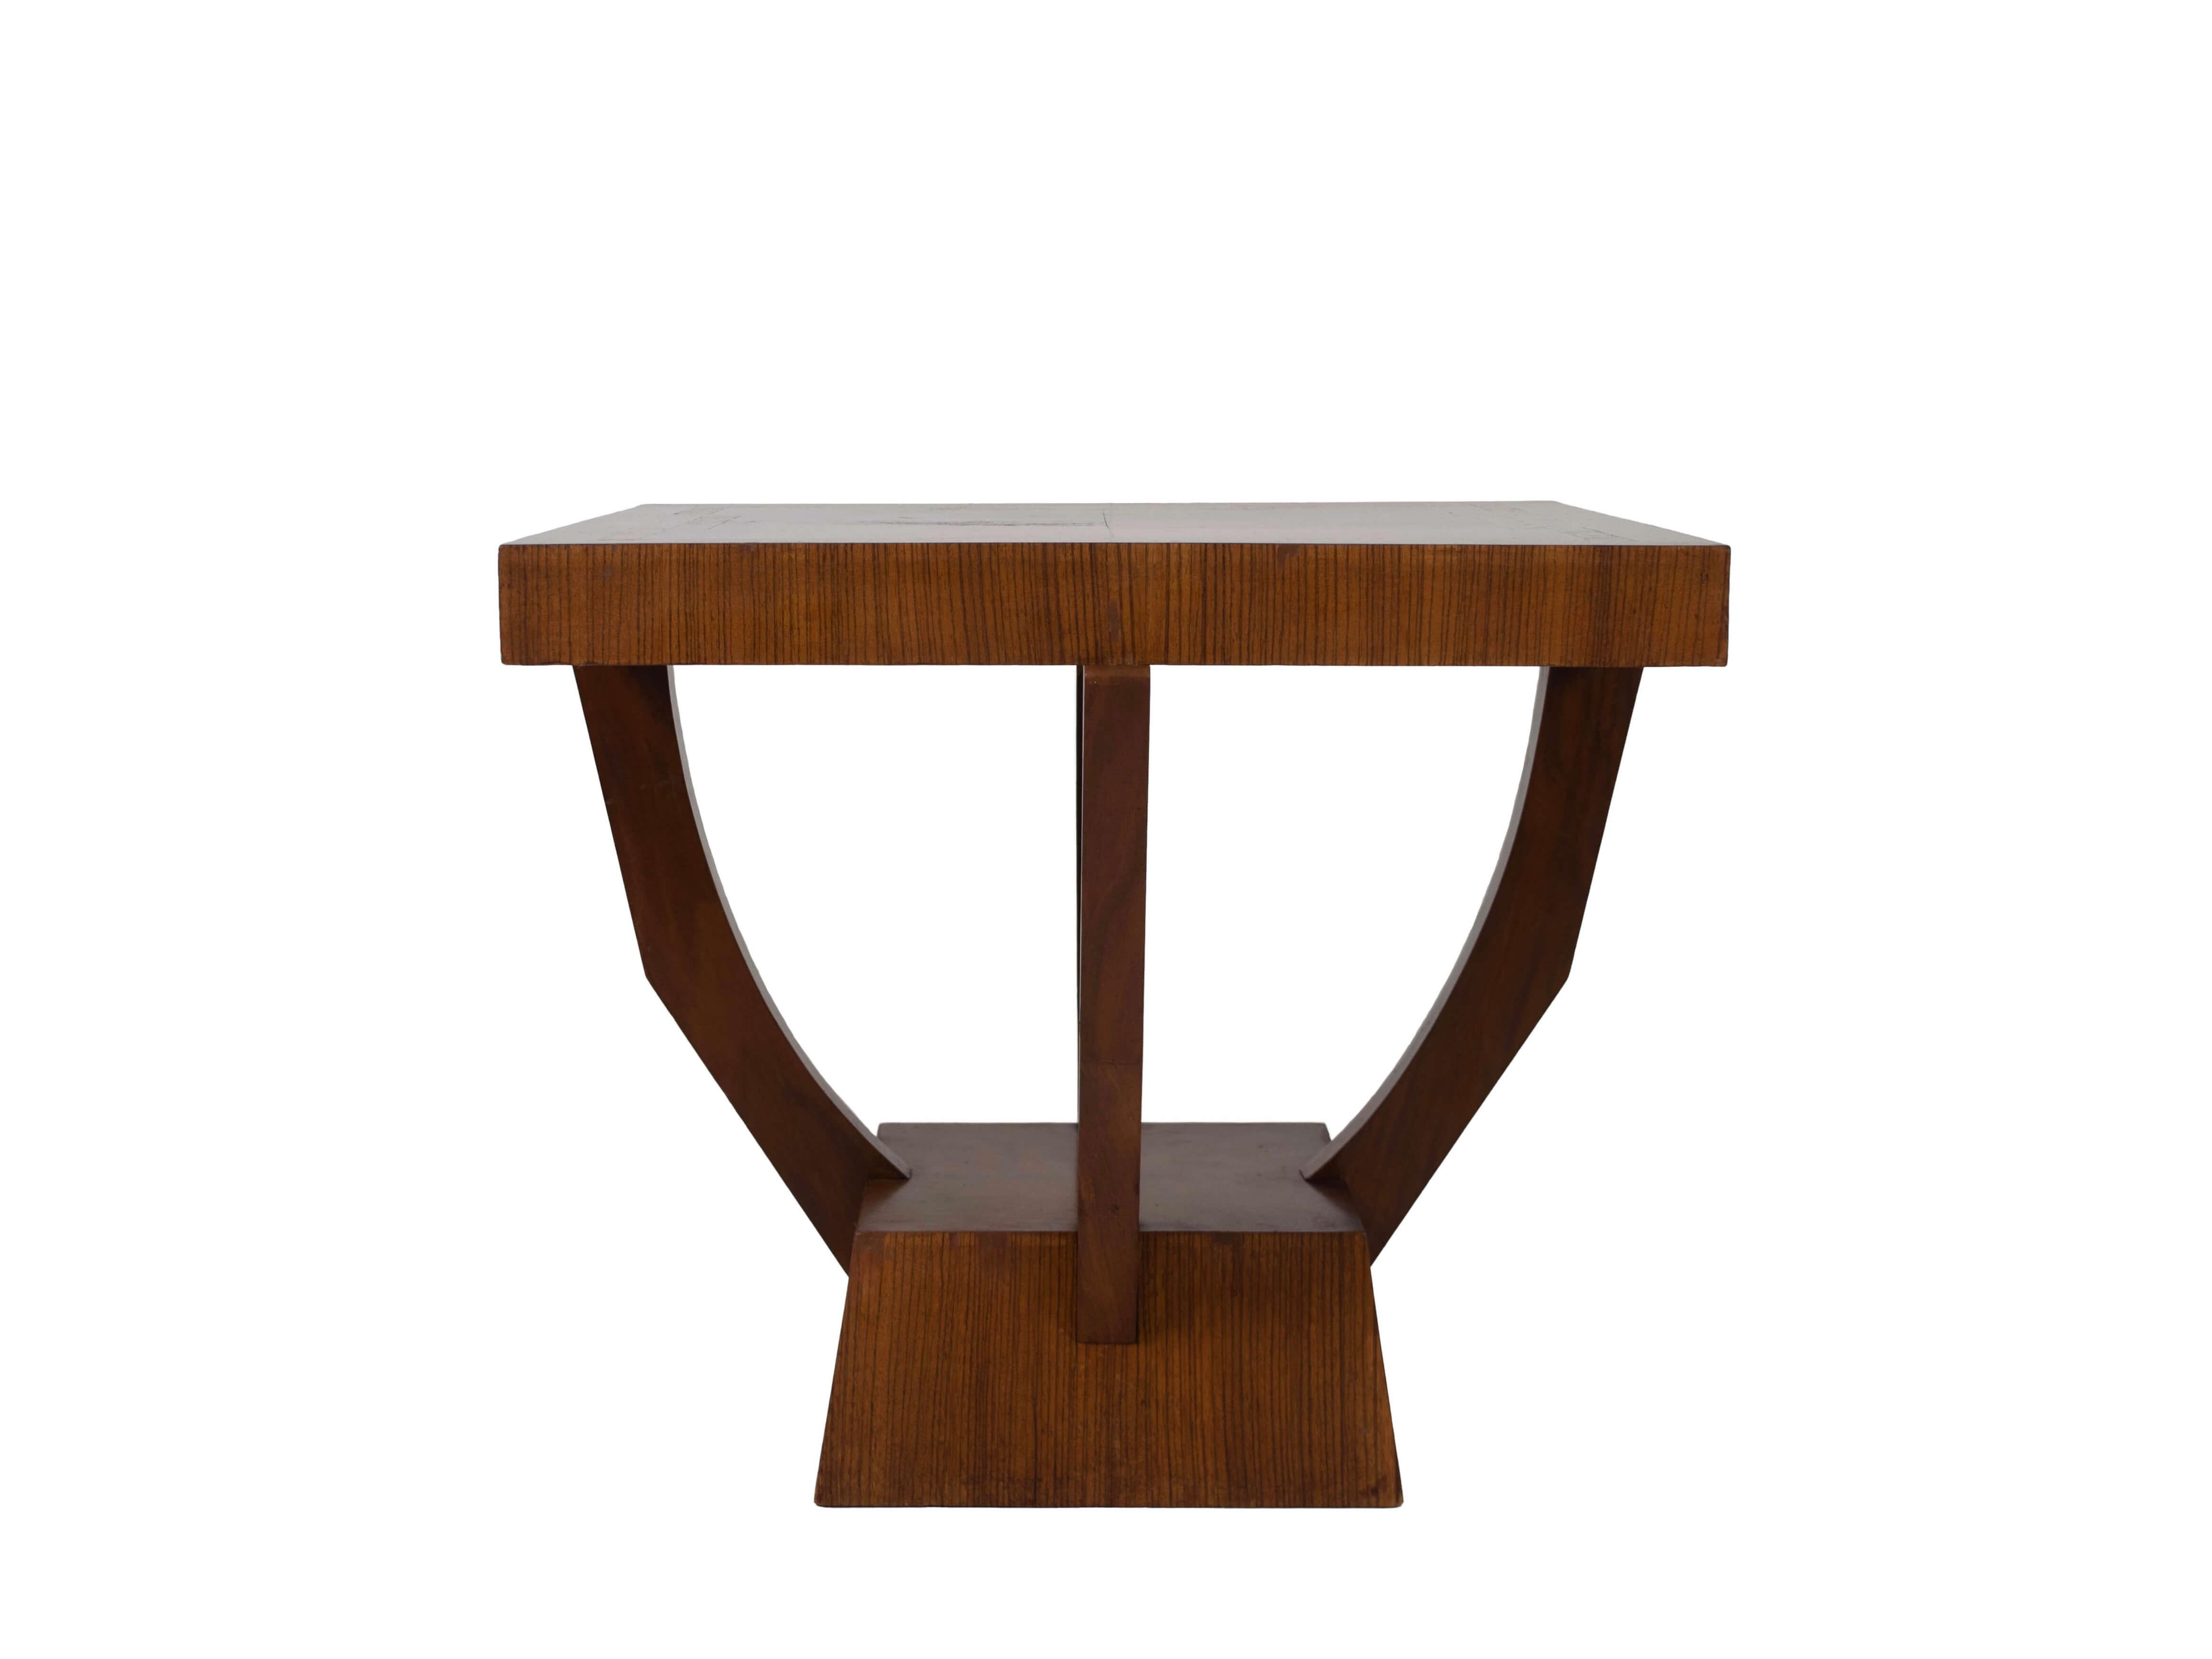 Nice Square Art Deco Sidetable from The Netherlands, ca 1930s. The top has a great design with an edge that has an inlay of different types of wood. The top rests on four legs that have a curved shape, with a square foot. Great Art Deco design that